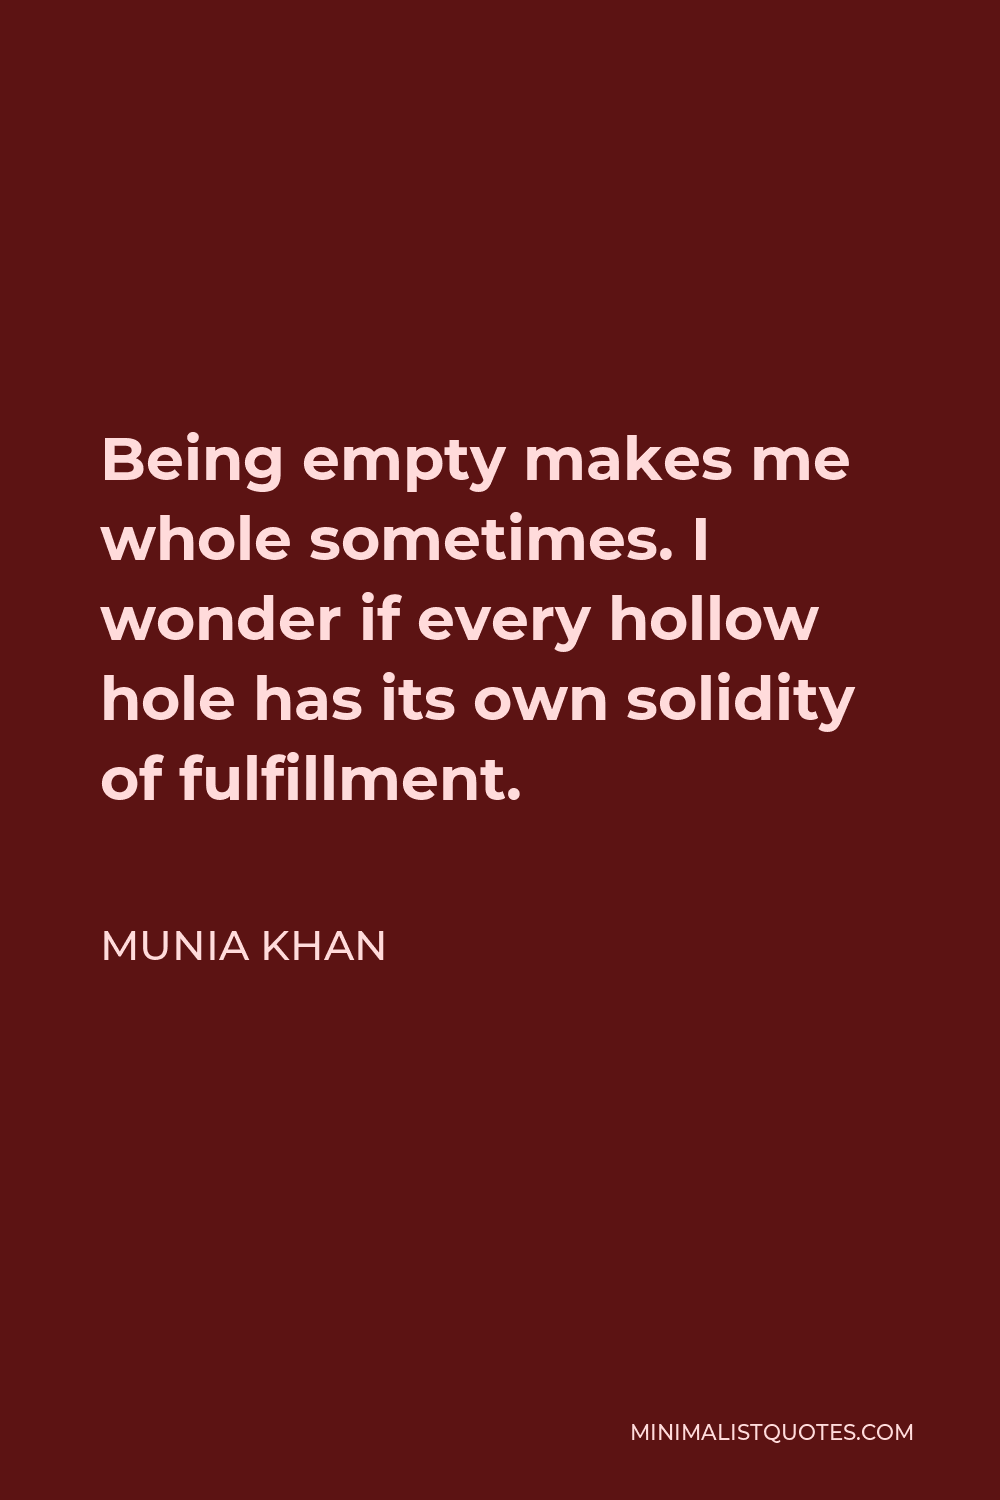 Munia Khan Quote - Being empty makes me whole sometimes. I wonder if every hollow hole has its own solidity of fulfillment.